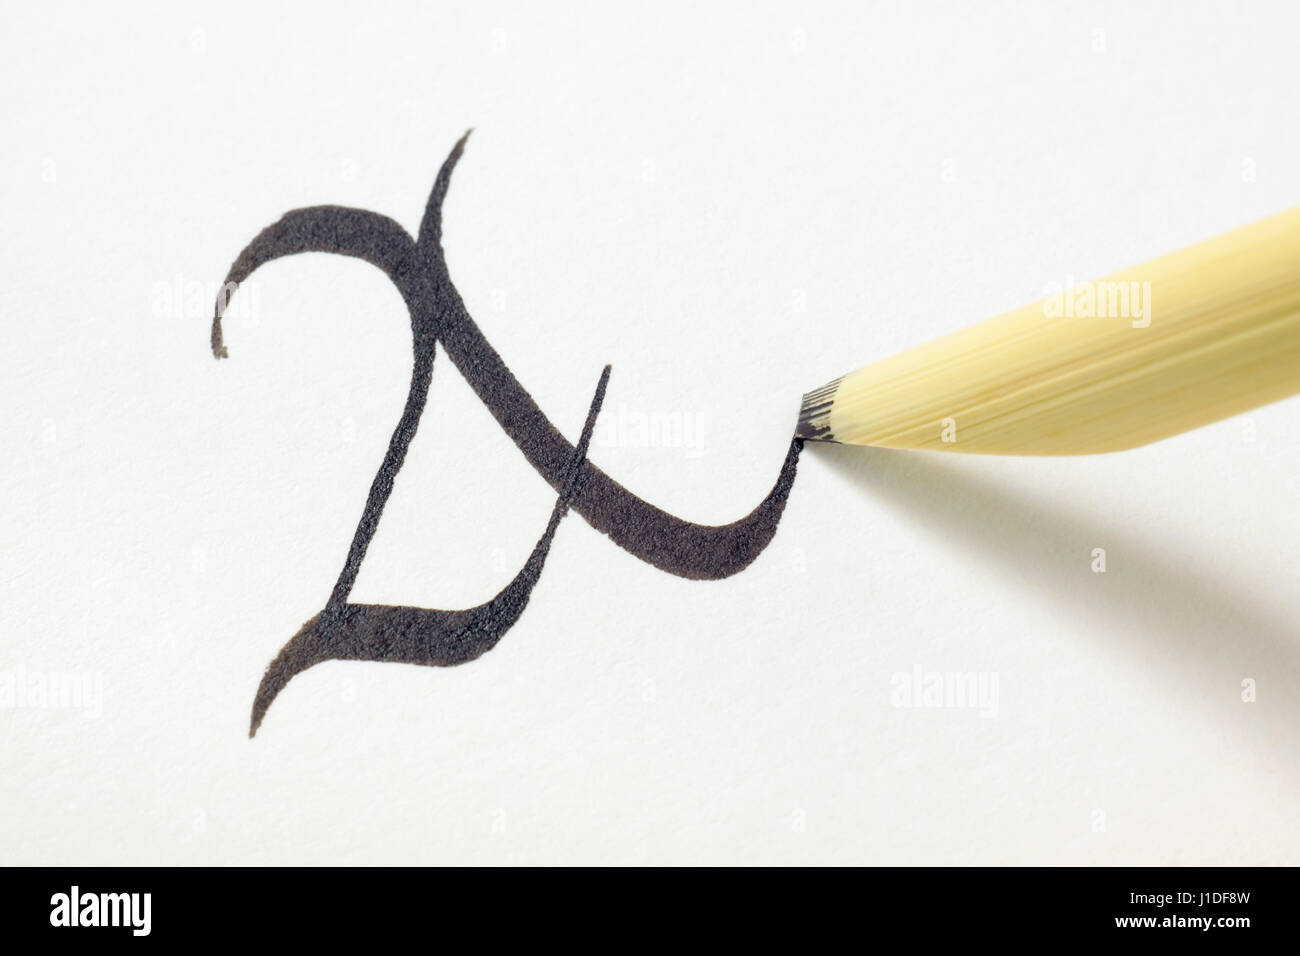 Reed pen (calamus, qalam) tip writing capital letter A in blackletter style on white paper with black ink Stock Photo